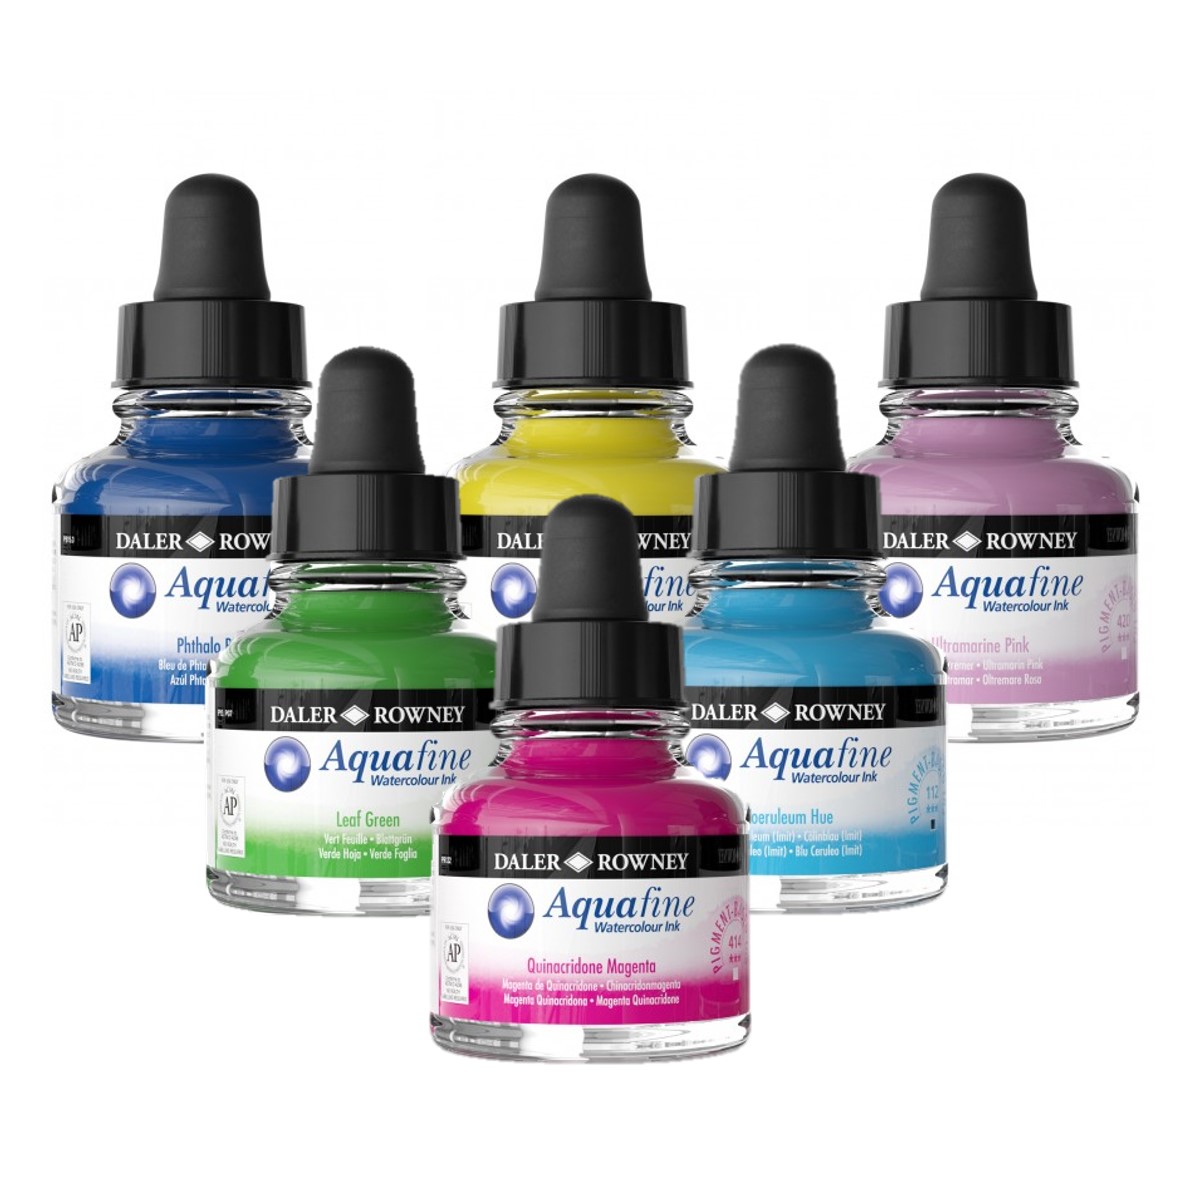 Daler Rowney Aquafine Inks are available in-store and online at The PaintBox, home to the widest range of traditional and progressive Art Supplies in Adelaide